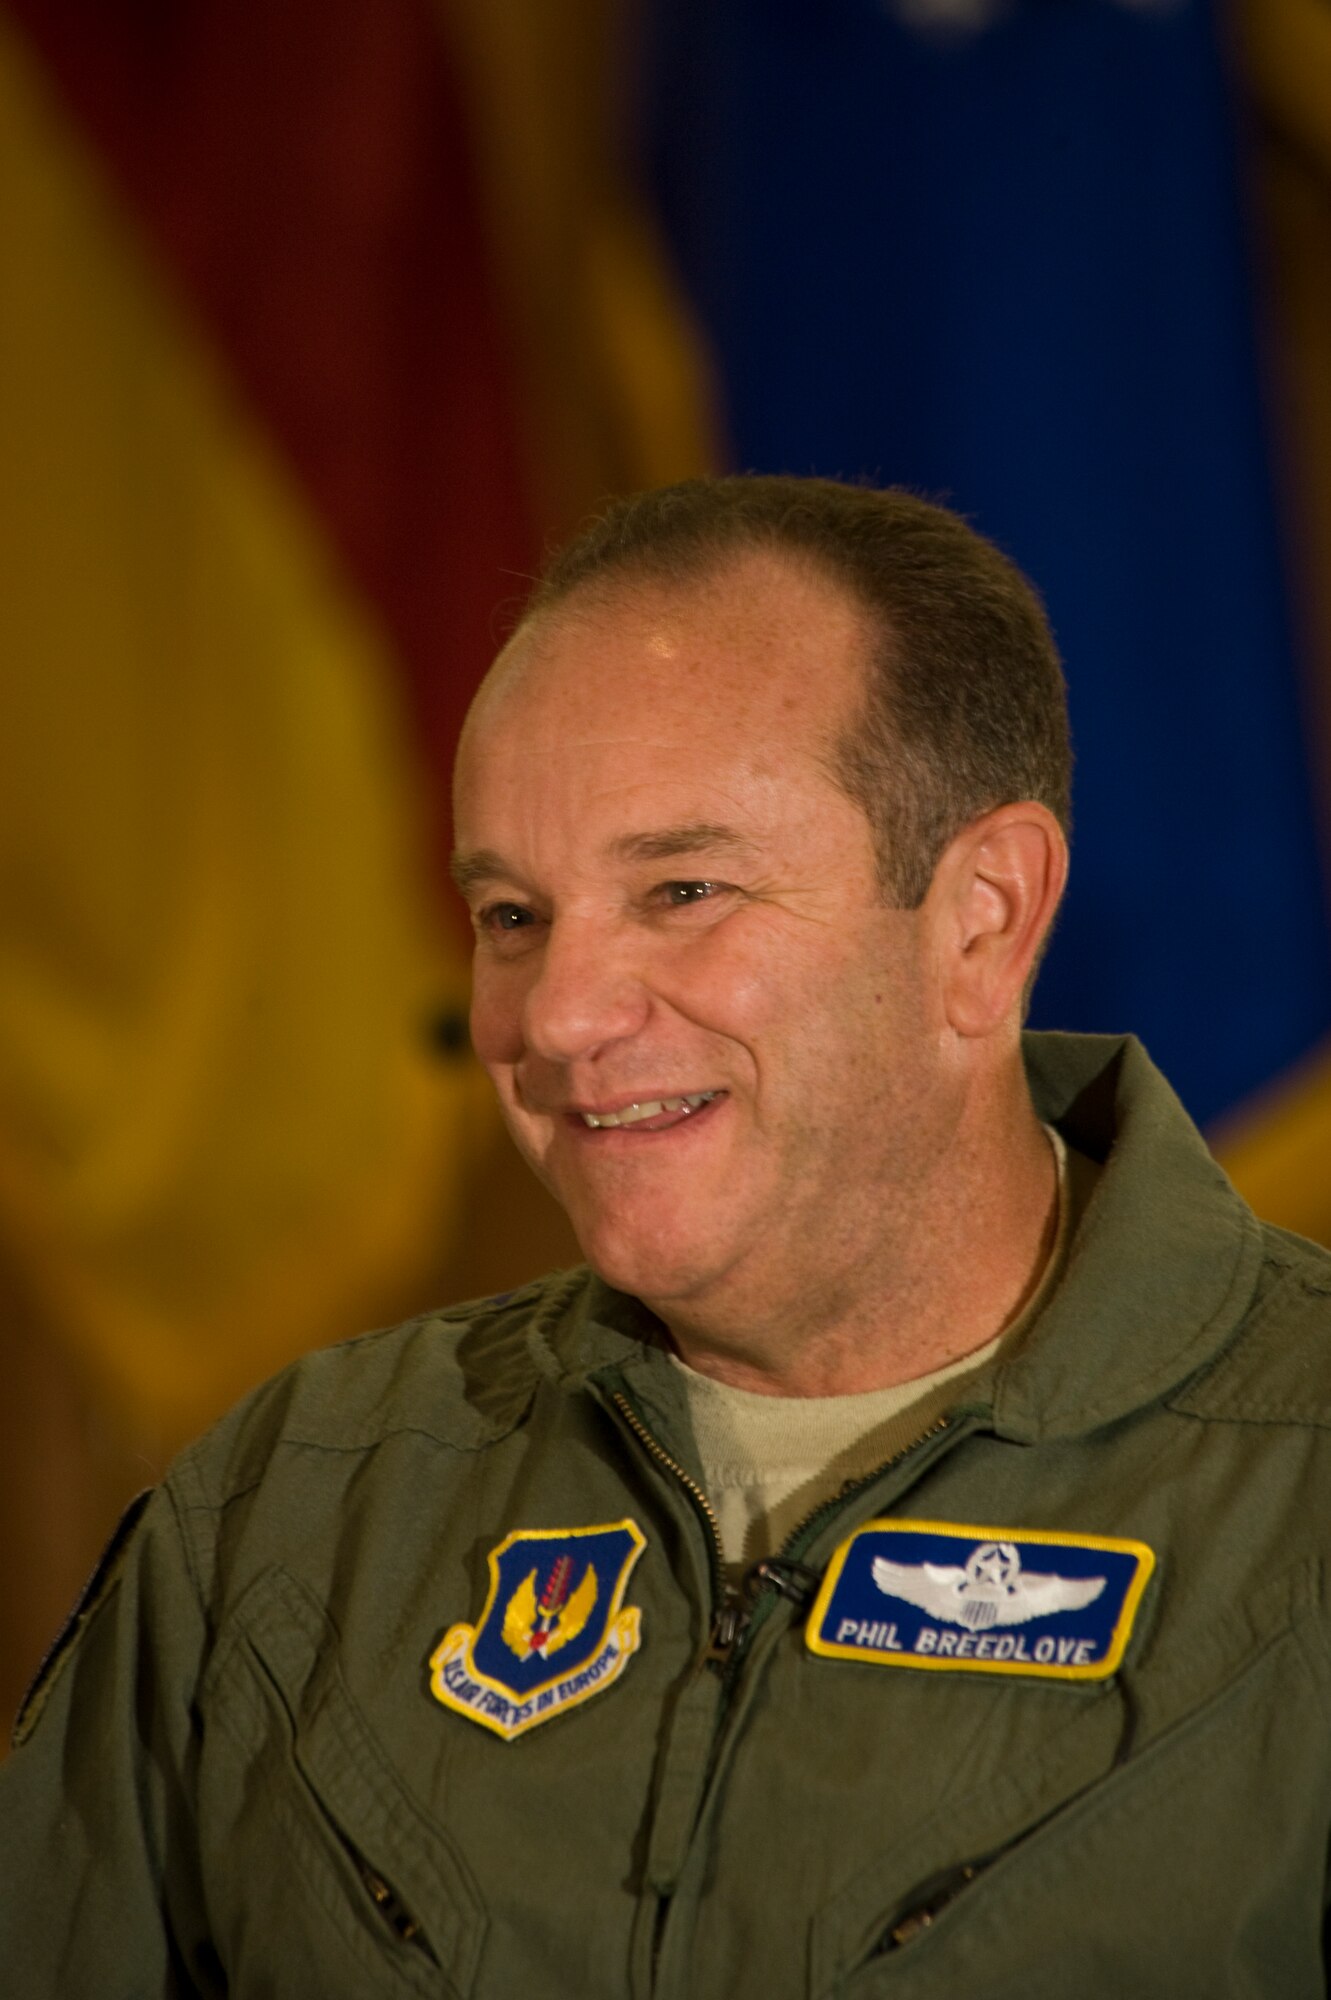 Gen. Philip M. Breedlove U.S. Air Forces in Europe commander, is interviewed
by American Forces Network, Ramstein, on Ramstein Air Base, Germany, Aug. 8,
2012. General Breedlove assumed command of U.S. Air Forces in Europe, U.S.
Air Forces Africa and Allied Air Command Ramstein during the ceremony. (U.S.
Air Force photo/ Master Sgt. Wayne Clark)